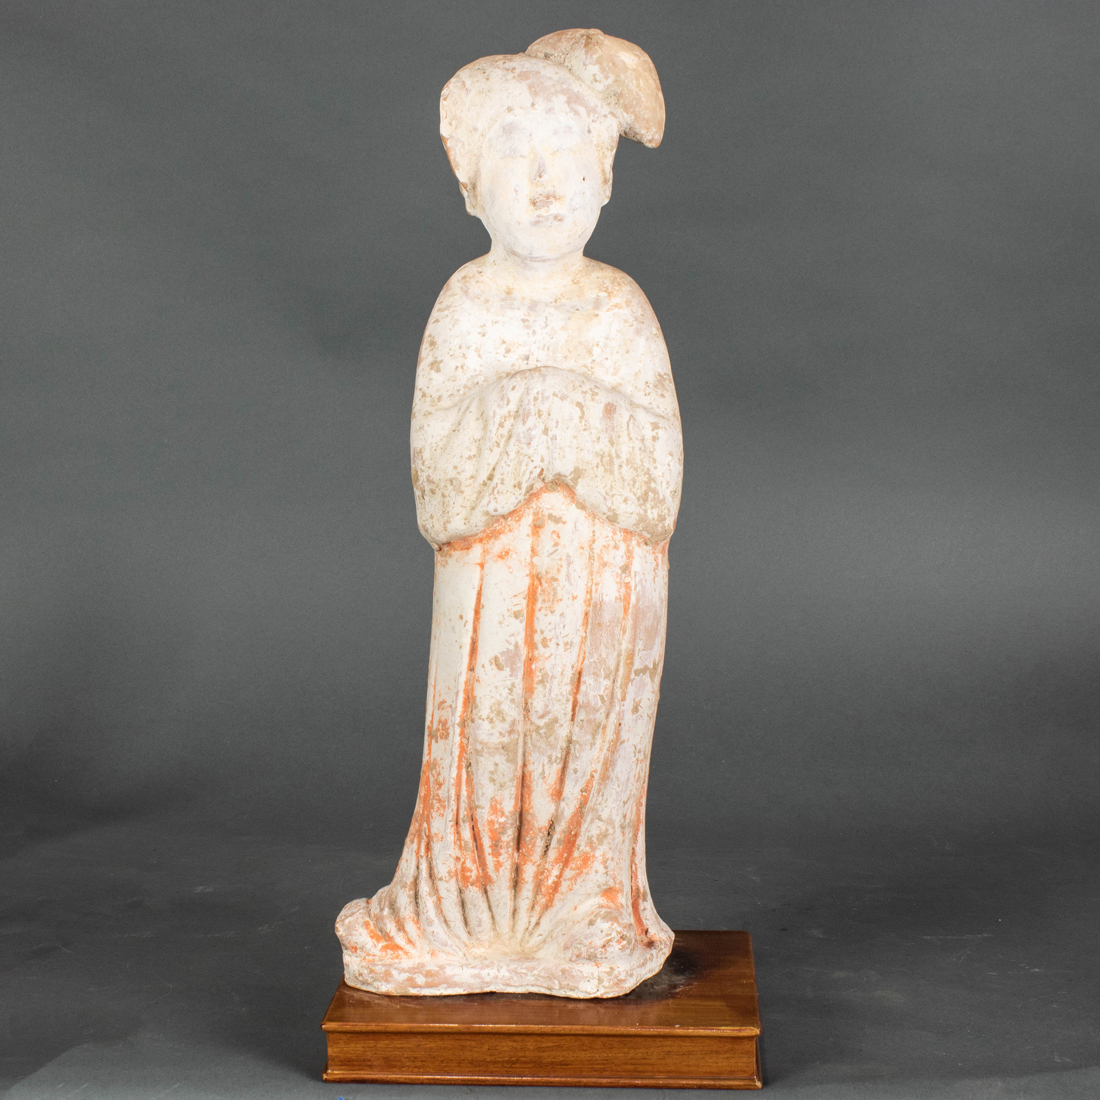 TANG DYNASTY PAINTED TERRA COTTA 2cddc7